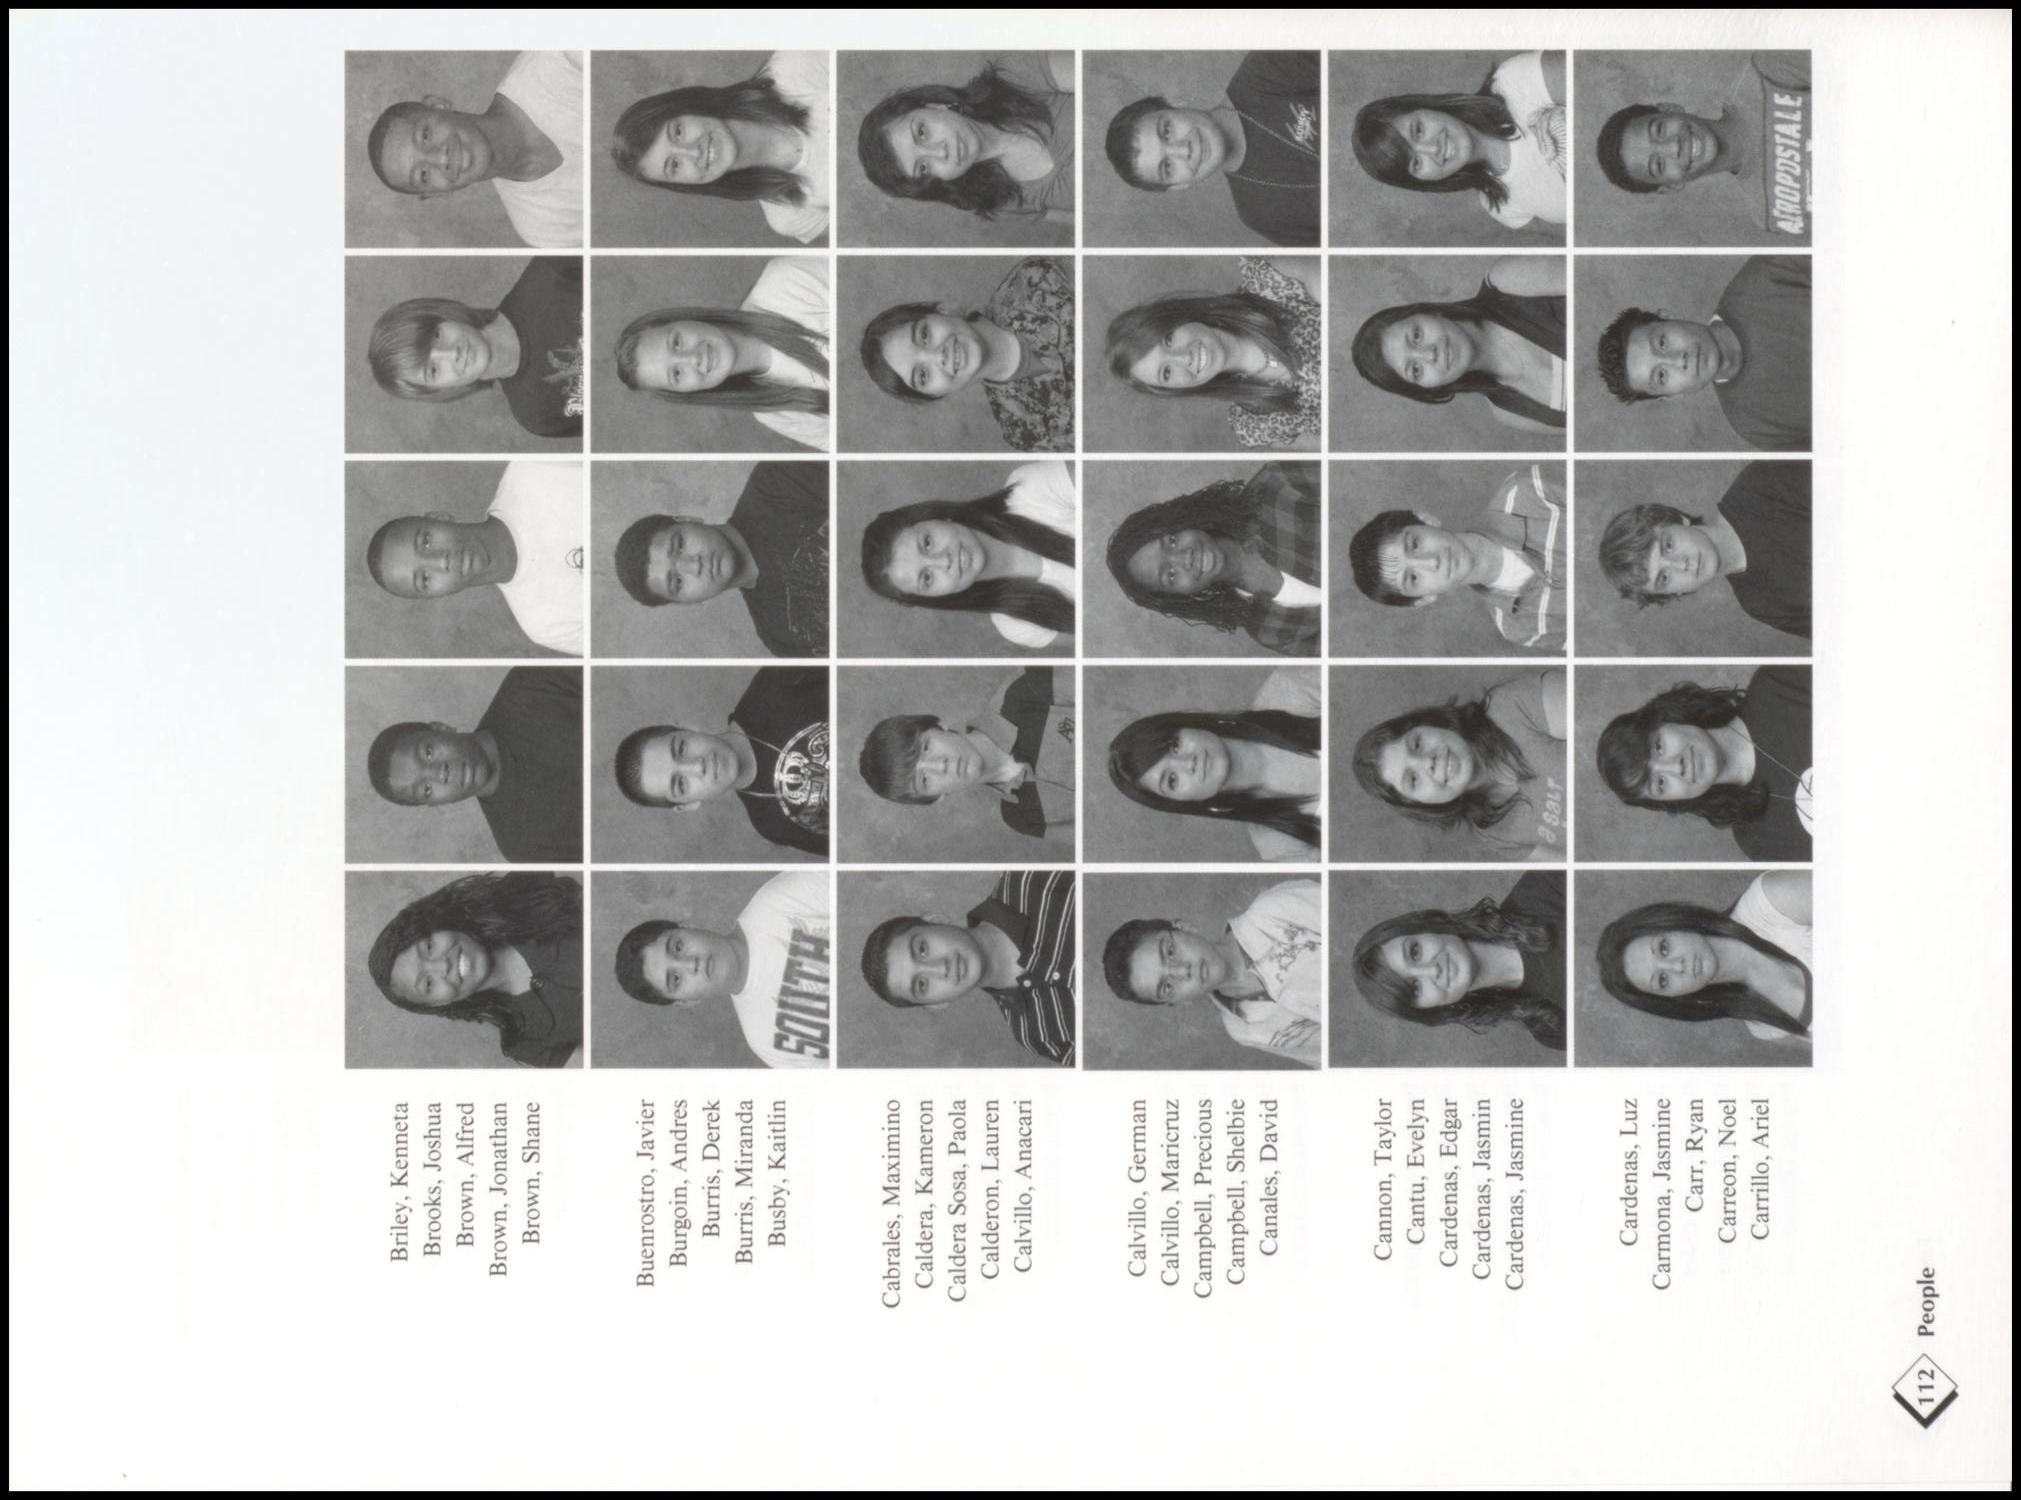 The Governor, Yearbook of Ross S. Sterling High School, 2010
                                                
                                                    112
                                                